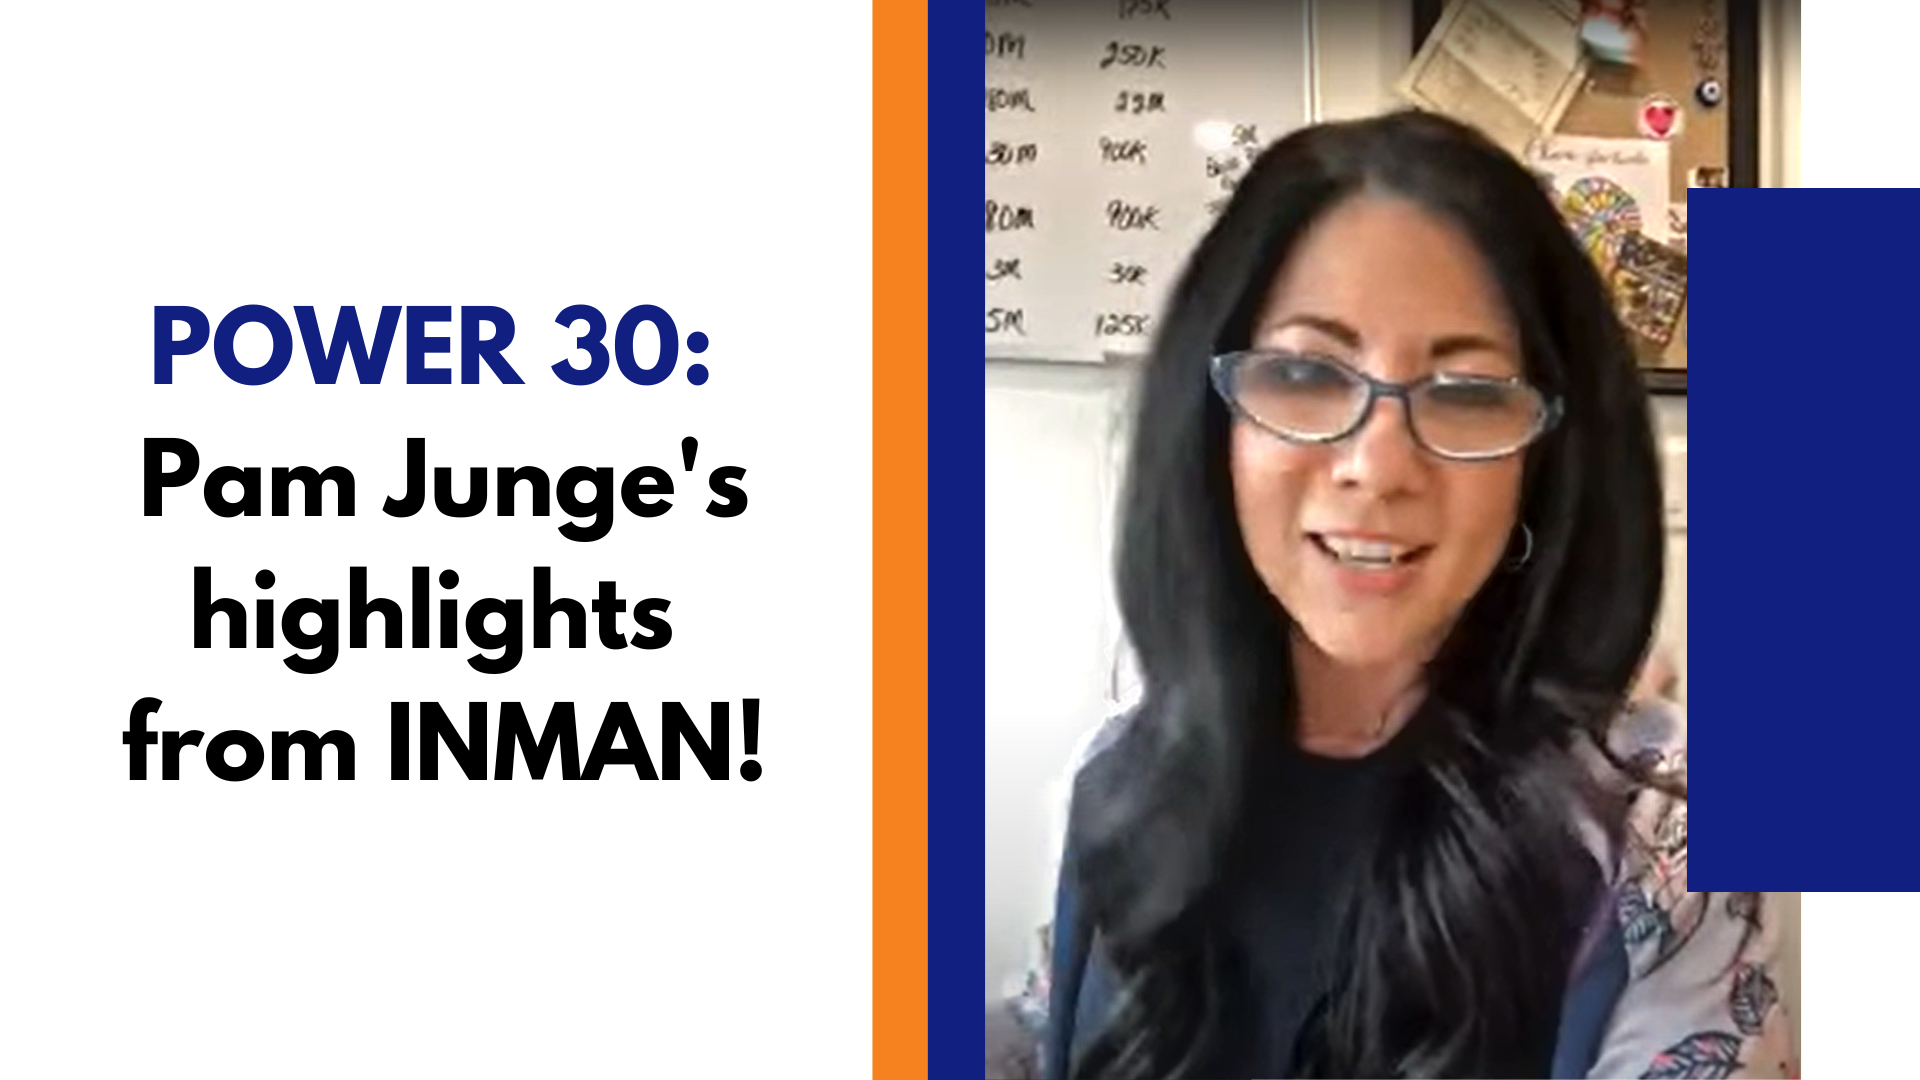 POWER 30: Pam Junge’s highlights from INMAN!